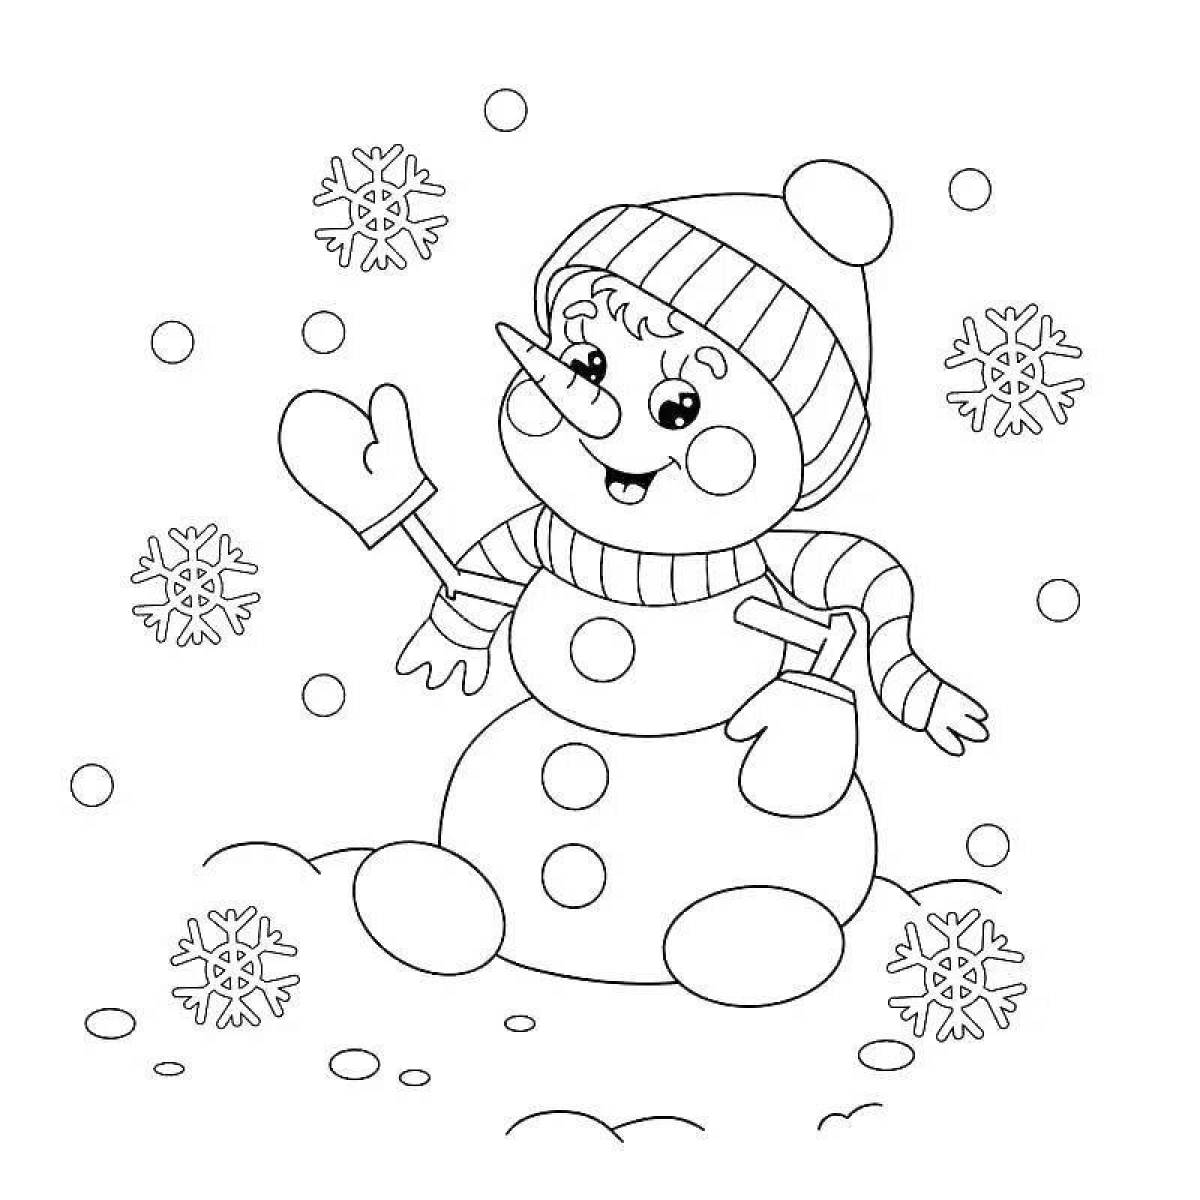 Cute snowman coloring page